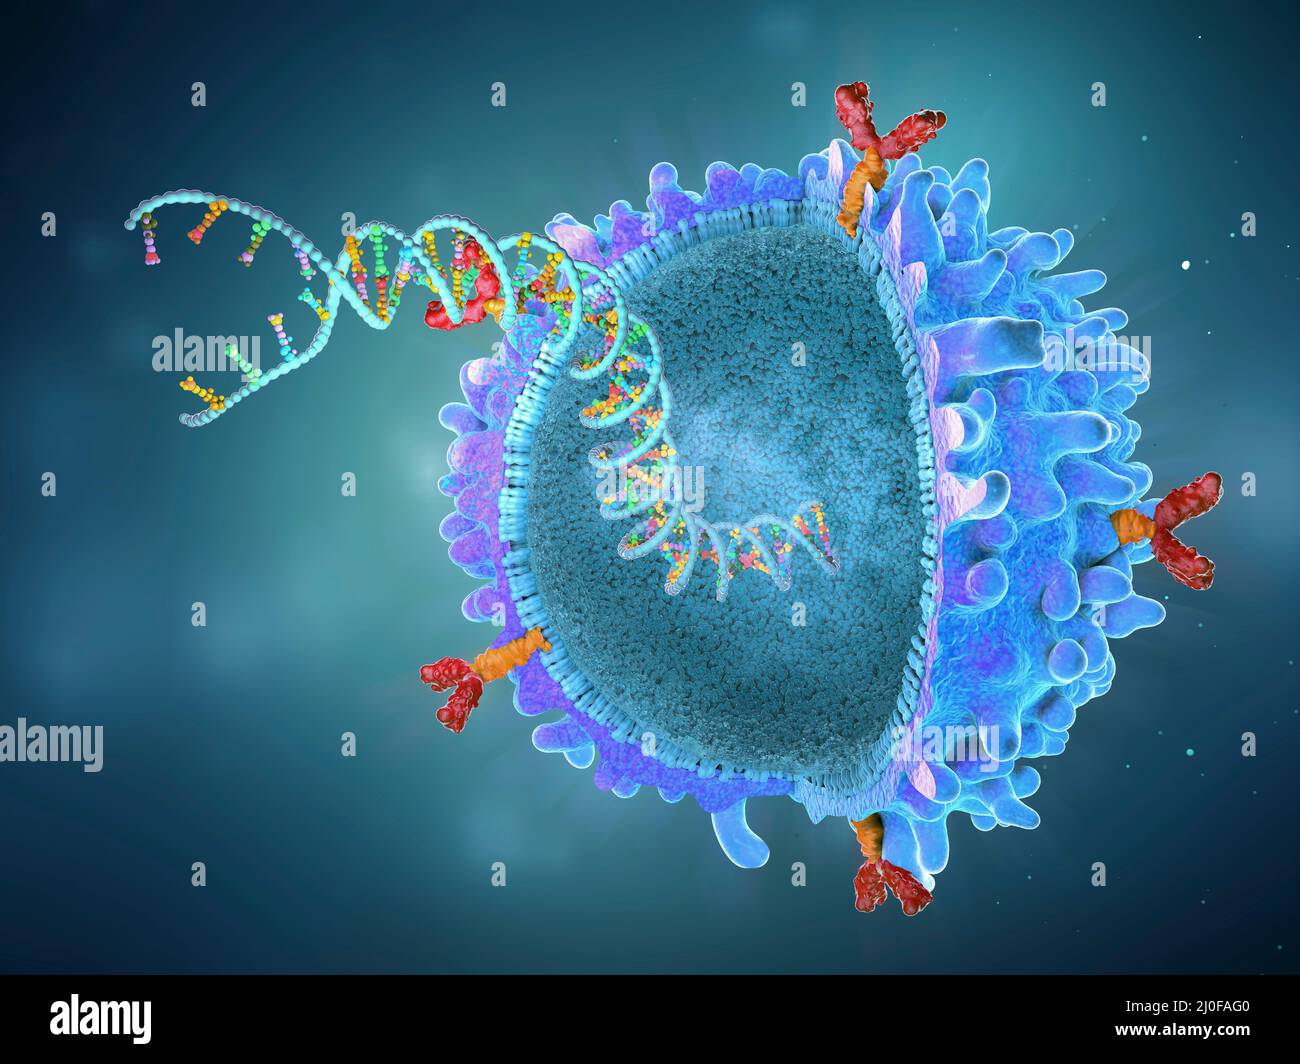 CAR T cell with implanted gene strain, illustration Stock Photo